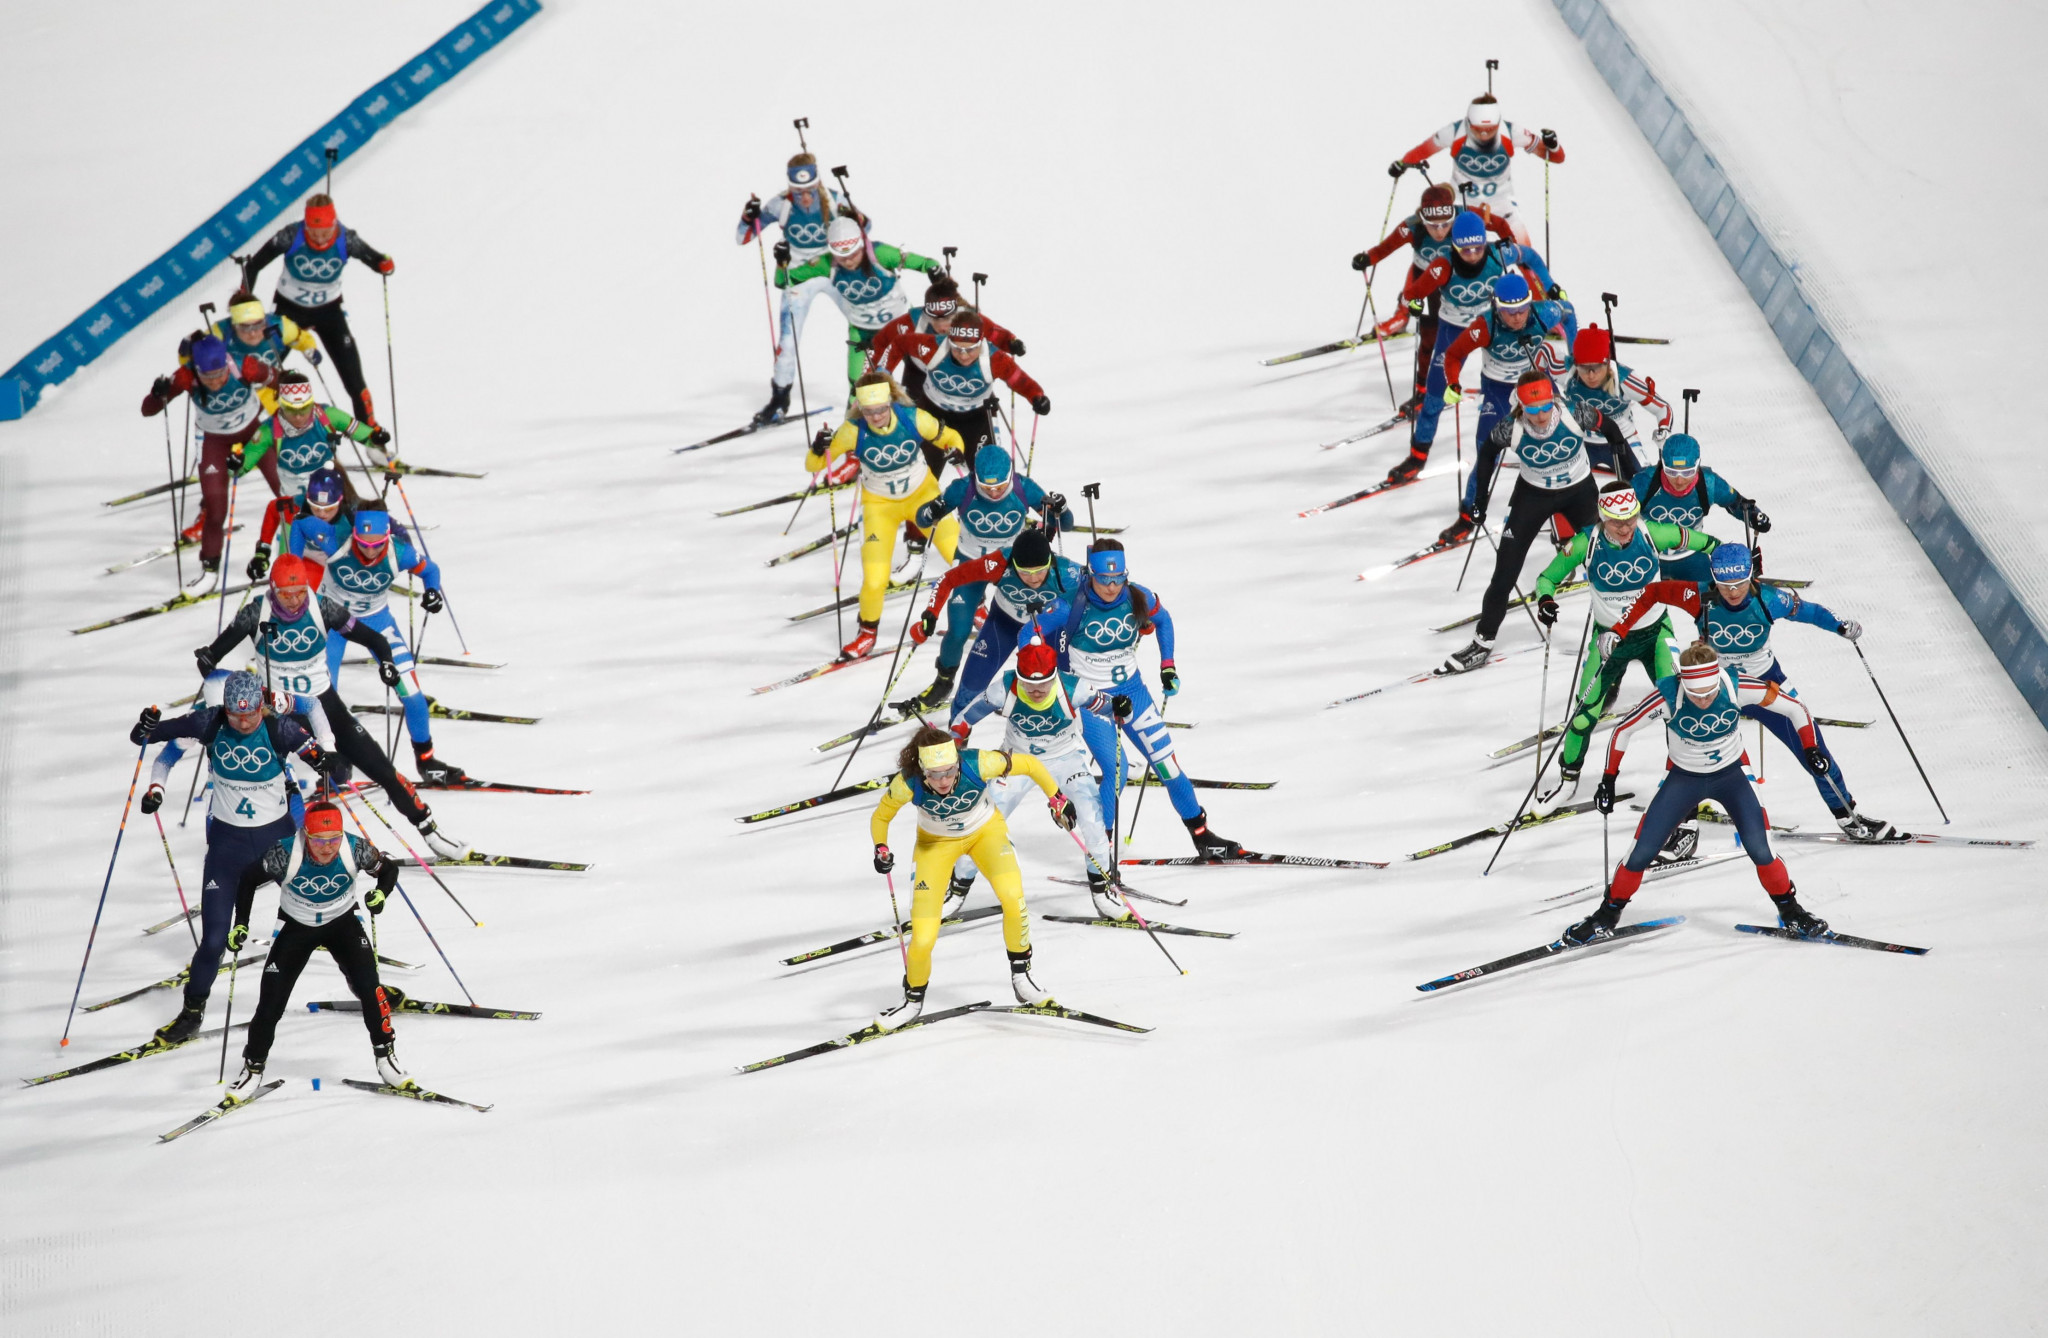 The International Biathlon Union have confirmed they will introduce a mass start event with 60 competitors from next season ©Getty Images